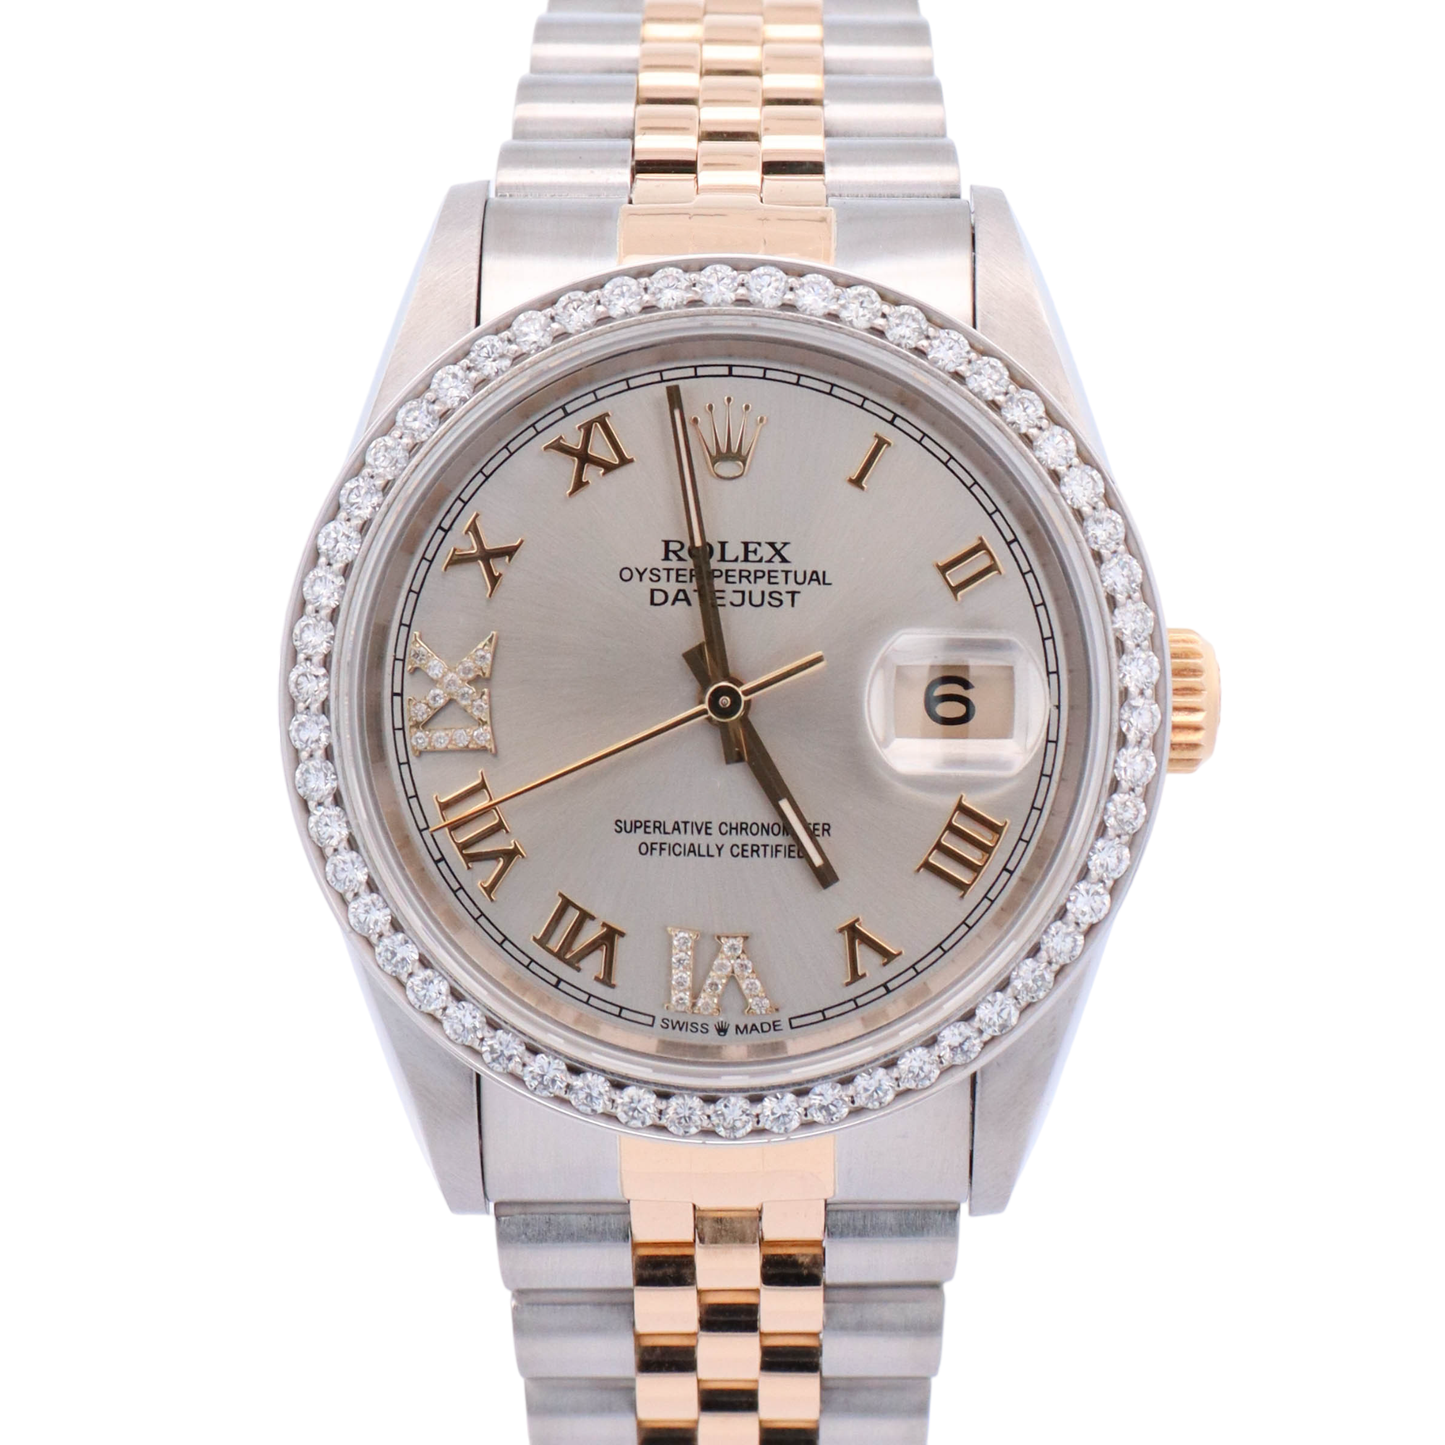 Rolex Datejust Two-Tone Stainless Steel & Yellow Gold 36mm Silver Roman Diamond #6 & #9 Dial Watch Reference #: 16233 - Happy Jewelers Fine Jewelry Lifetime Warranty